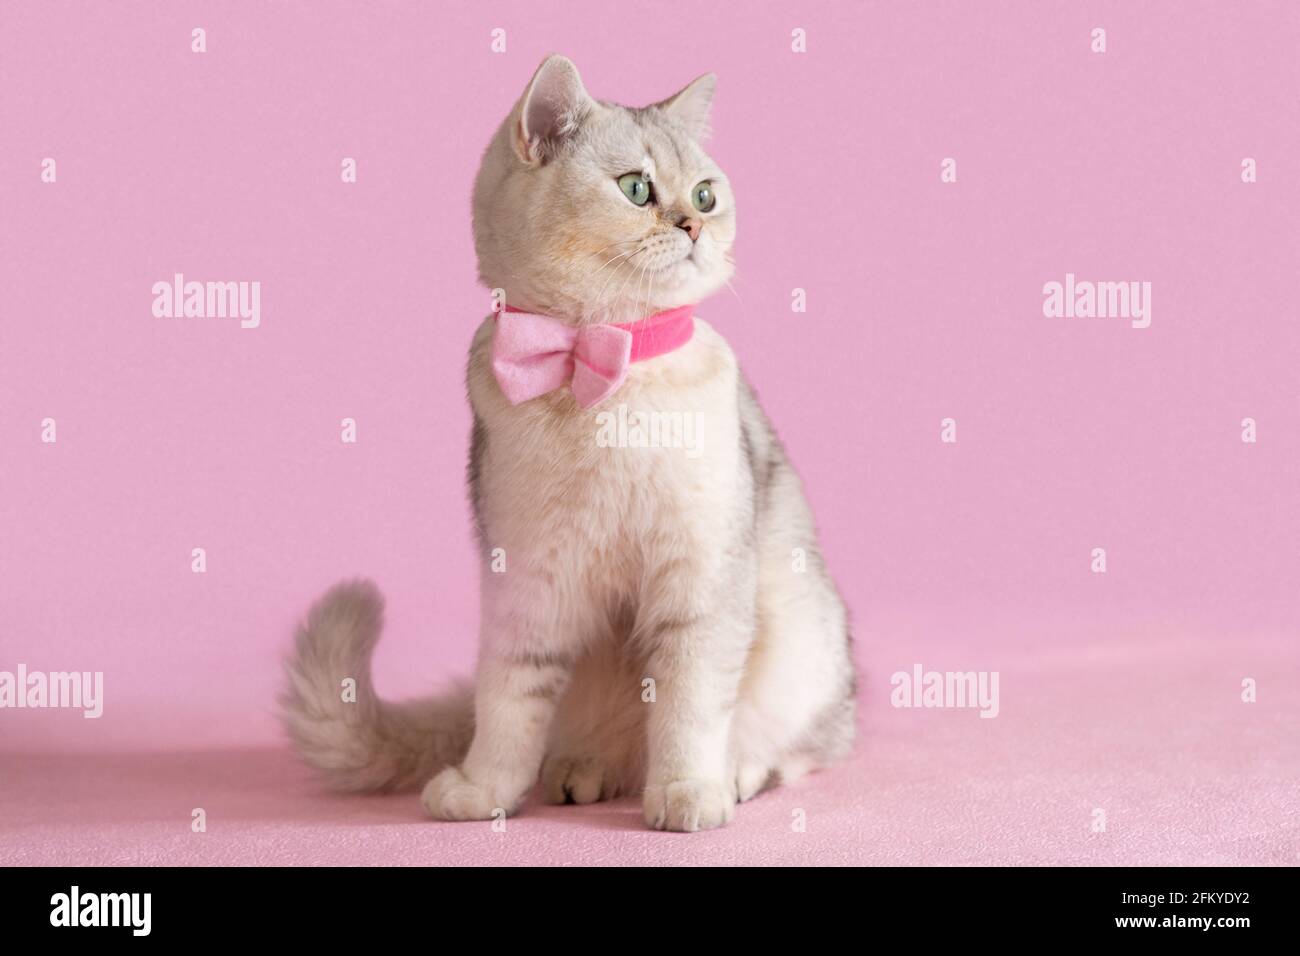 Beautiful white British cat in a pink bow tie, sits on a pink background, looks sideways Stock Photo